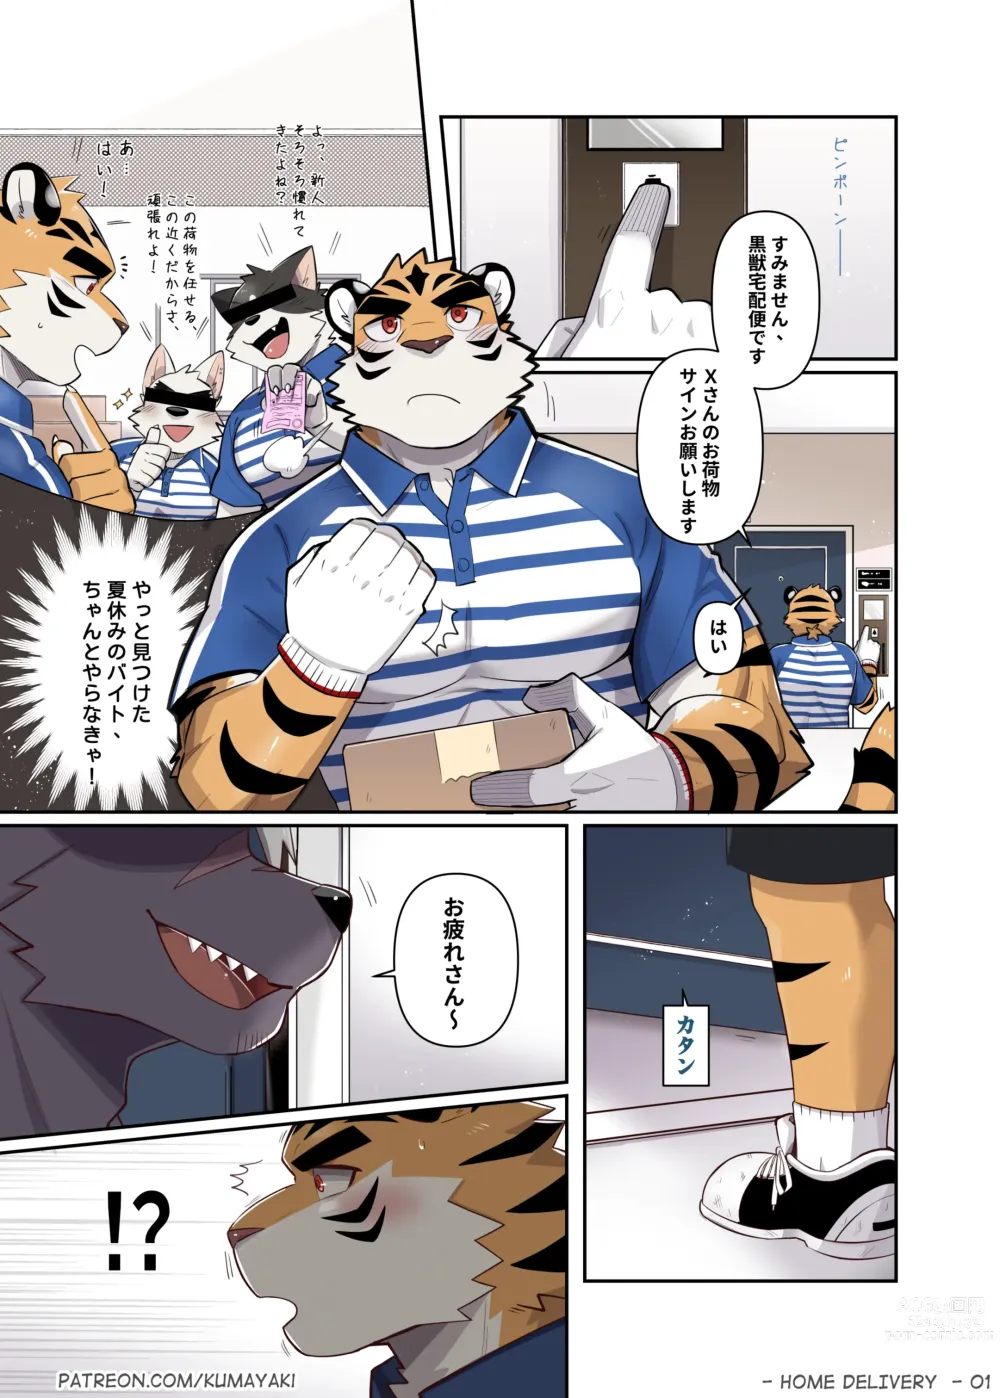 Page 3 of doujinshi Home Delivery HD Remastered